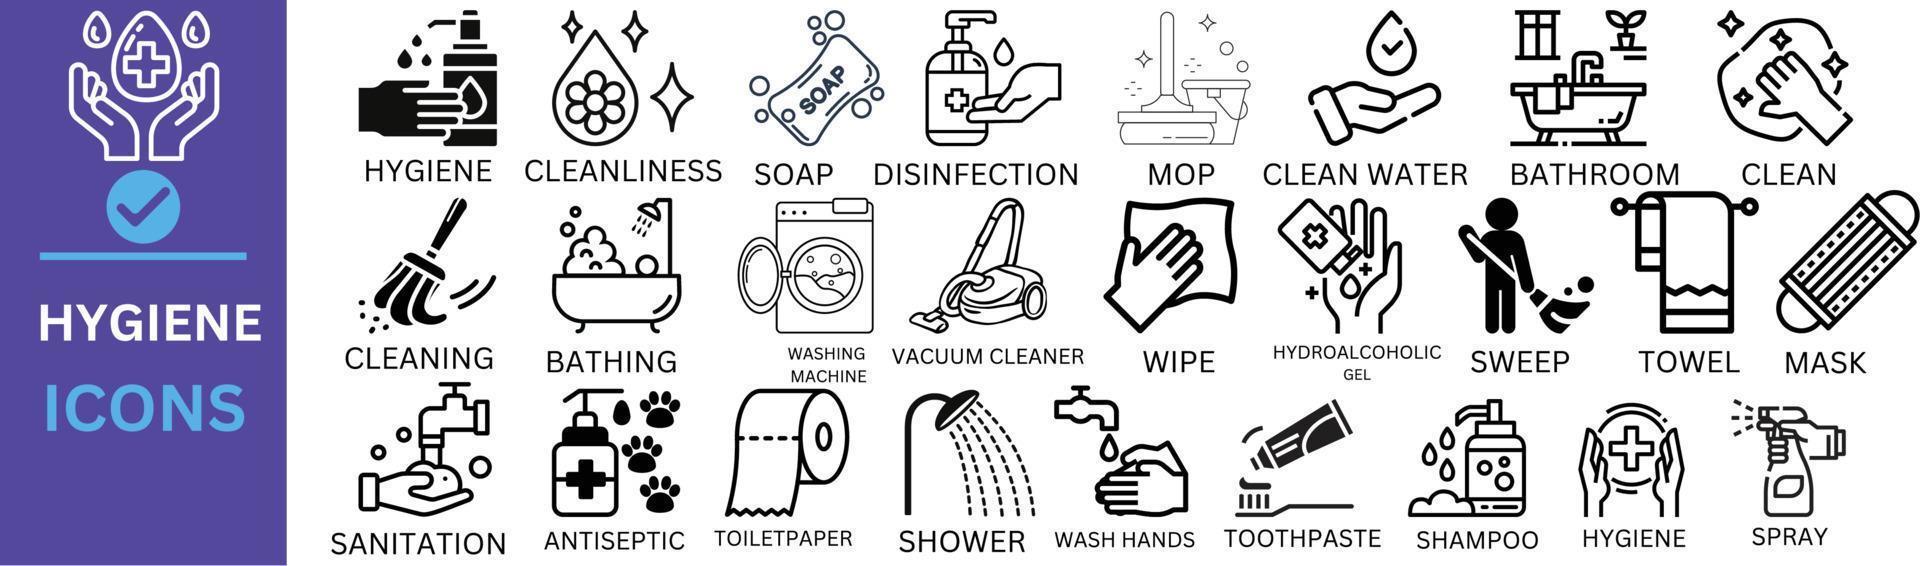 Hygiene icon set. Containing cleaning, disinfection, soap, bathing, sweep, shower, washing hands, clean and sanitation icons. Cleanliness concept. Solid icon collection. vector